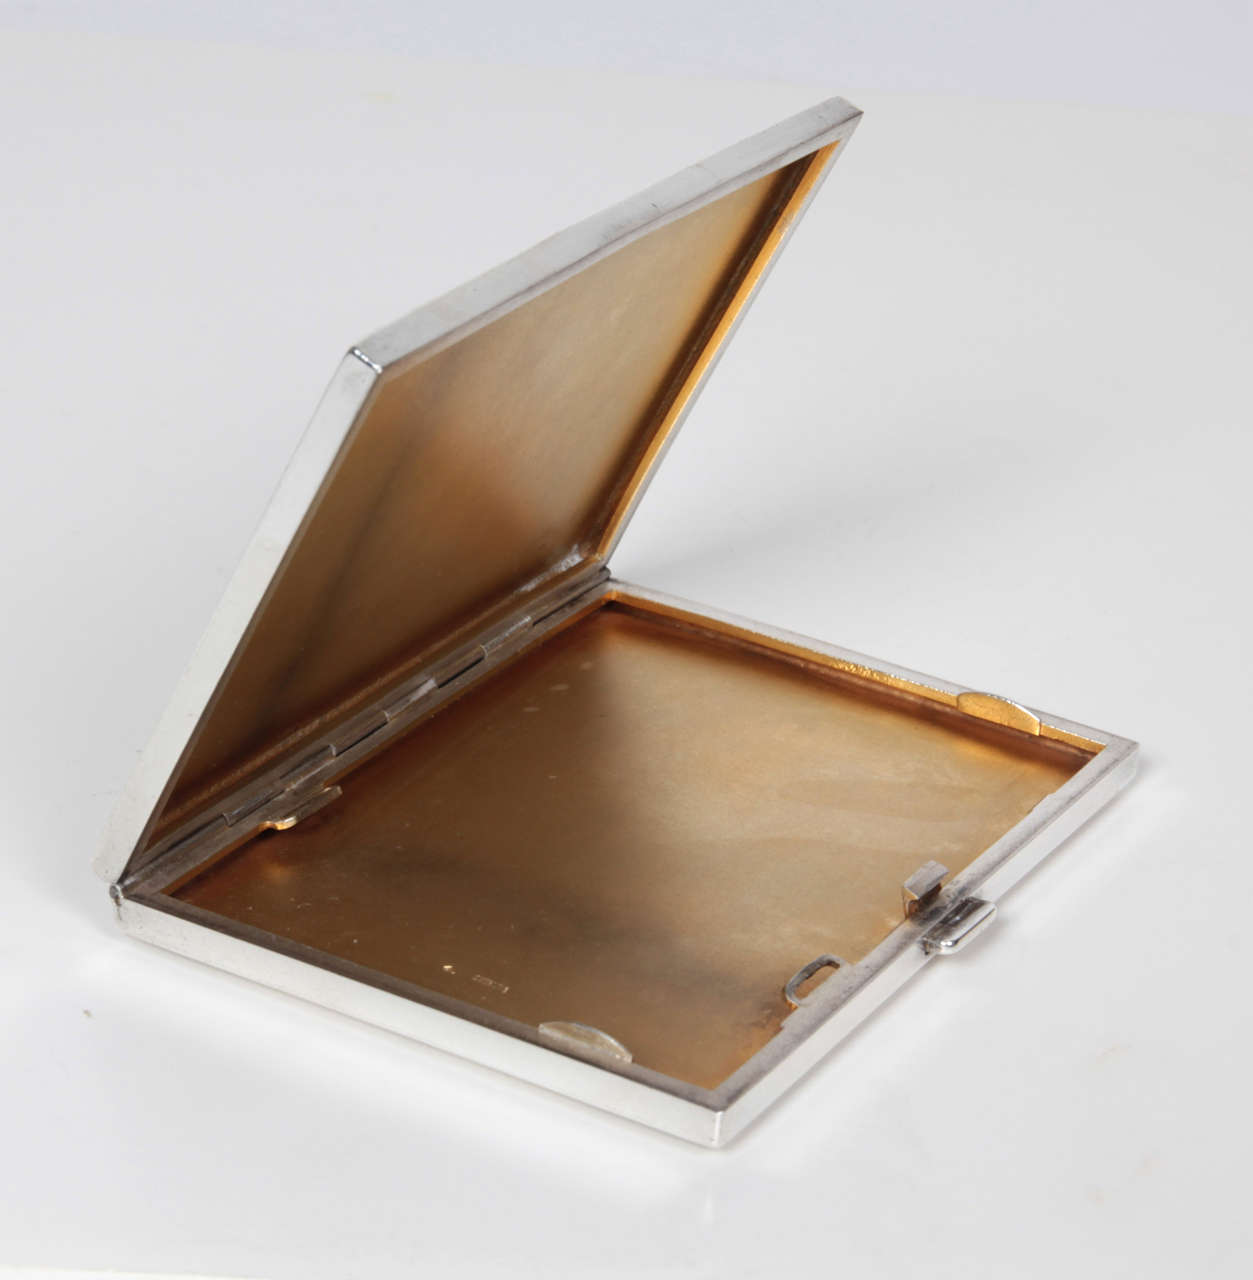 Paul Laszlo Rare Art Deco Enameled Sterling Cigarette Case c.1925 In Excellent Condition For Sale In New York, NY